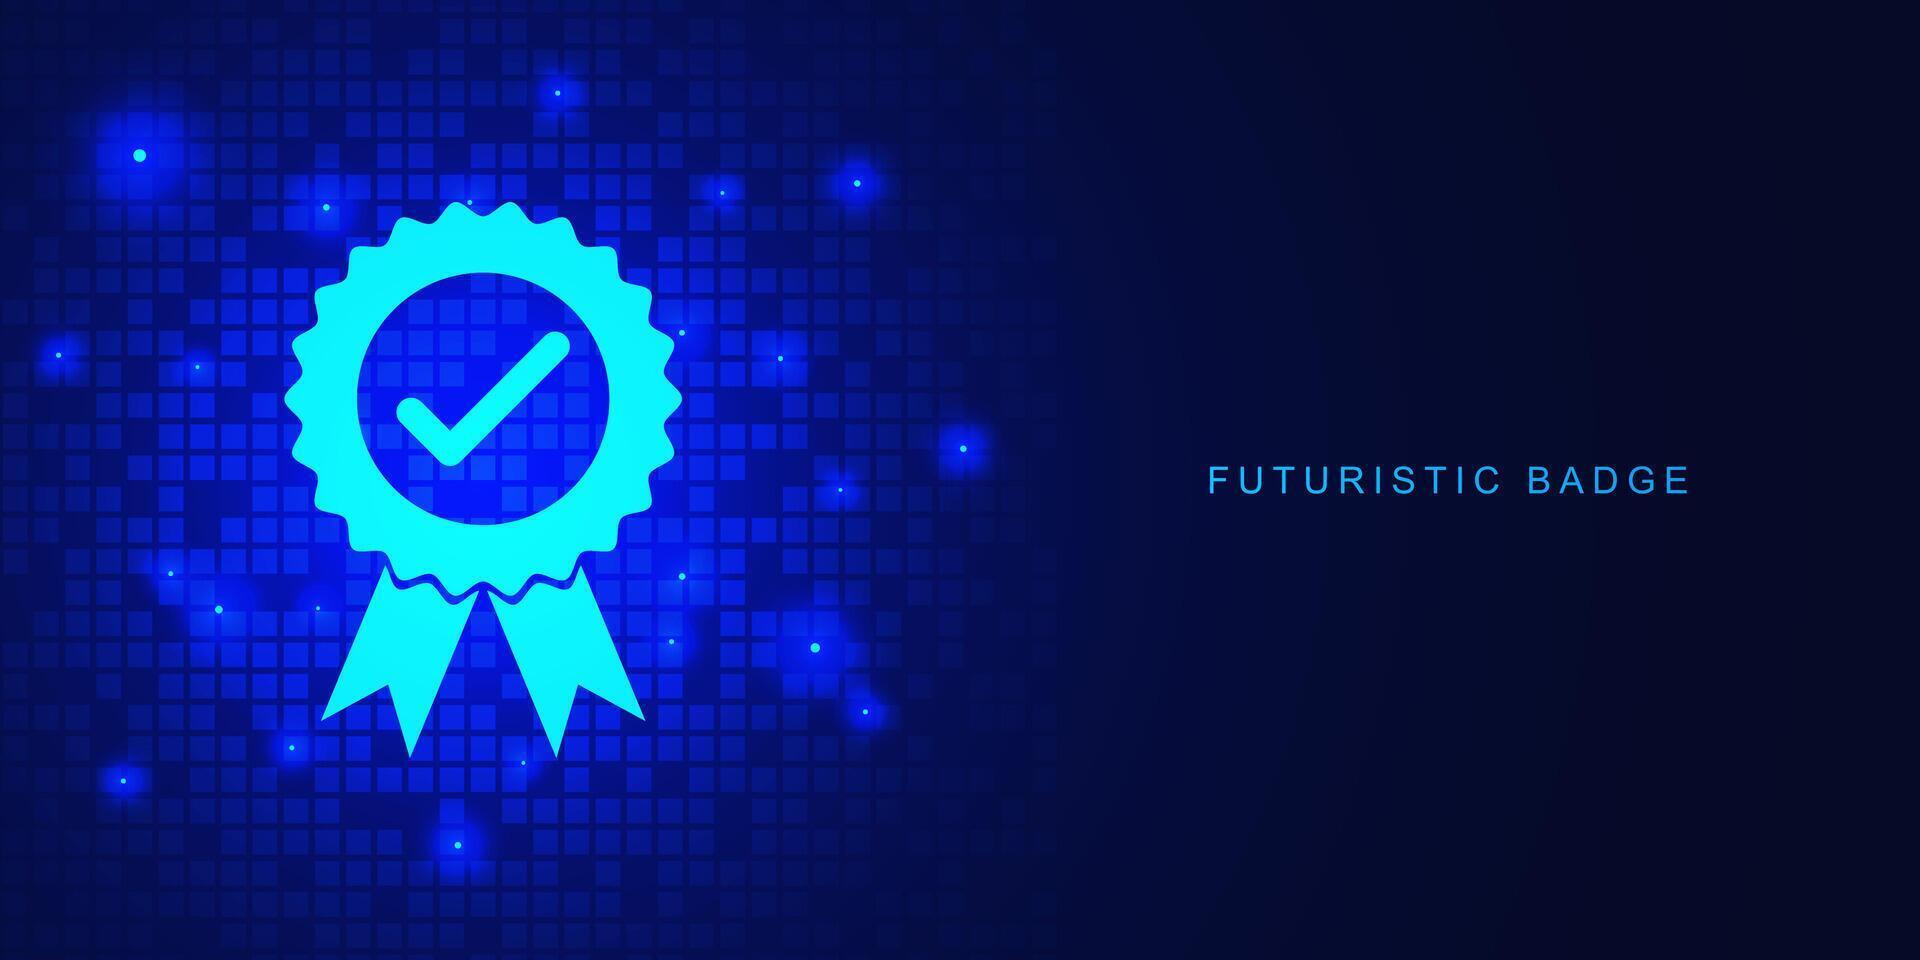 Futuristic badge or award medal for best quality, business guarantee with check mark on blue technology background. Vector illustration.